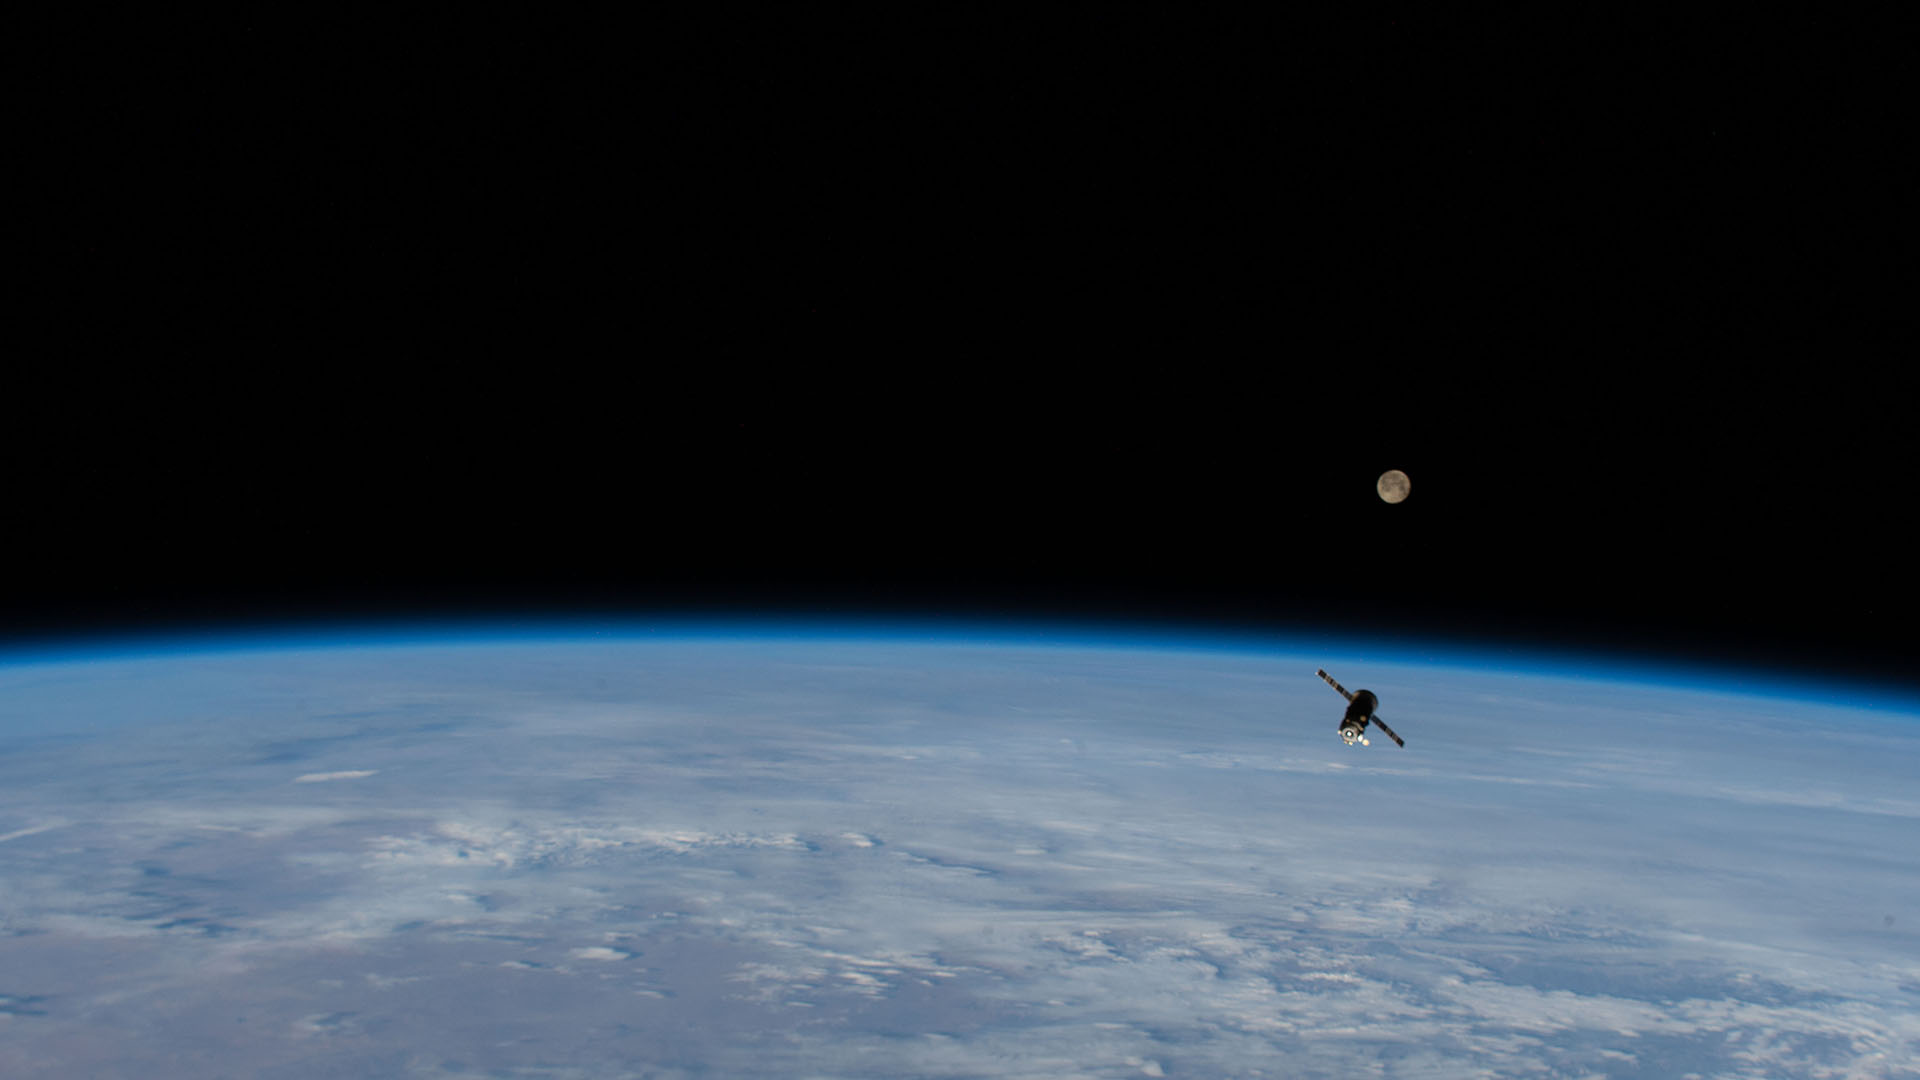 The full moon above the Earth's horizon along with resupply ship.